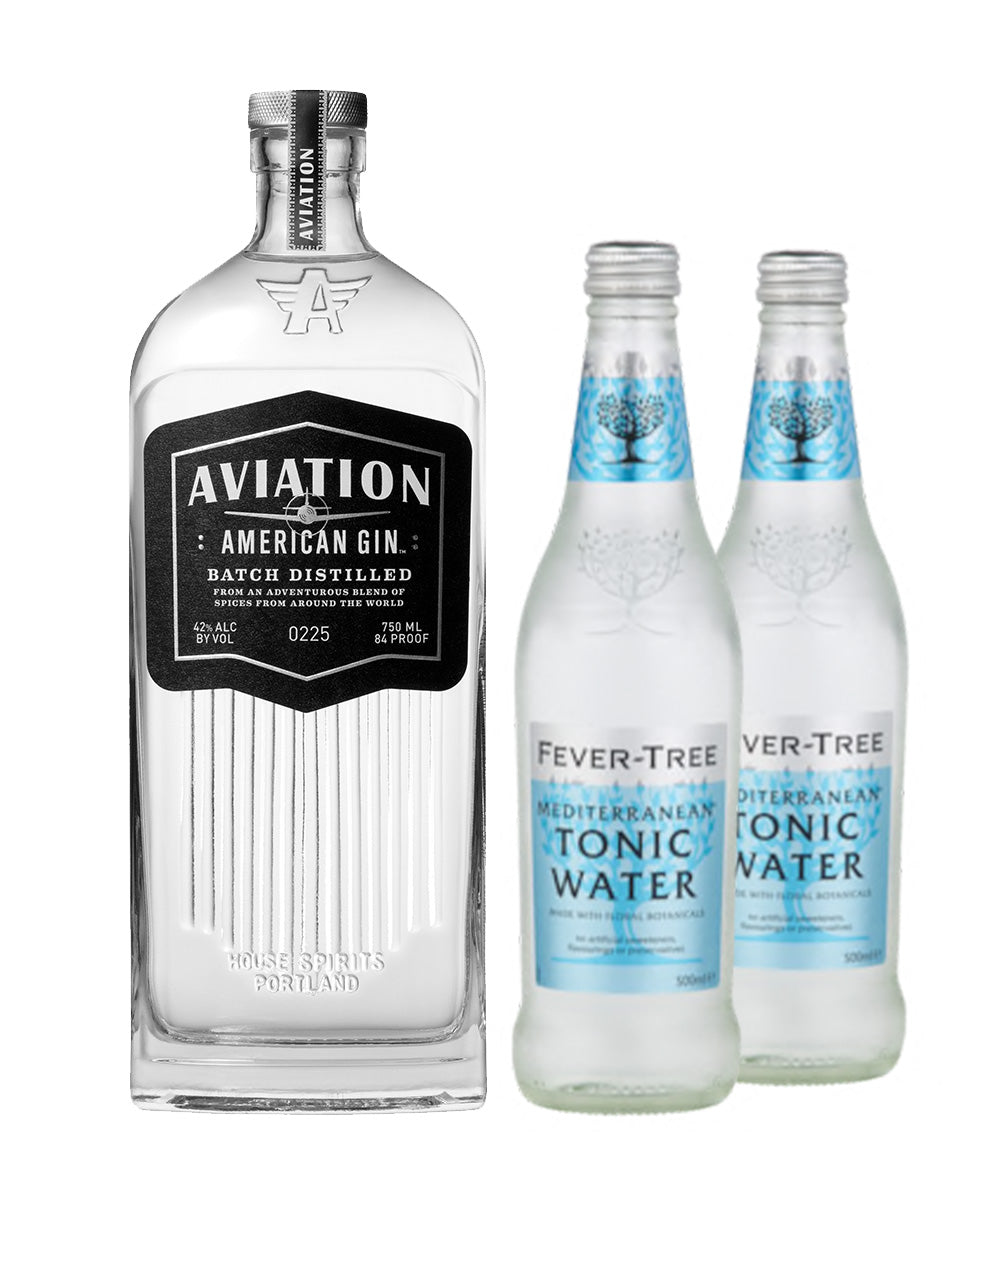 Aviation American Gin with | Tonic Fever-Tree Two ReserveBar Waters Mediterranean